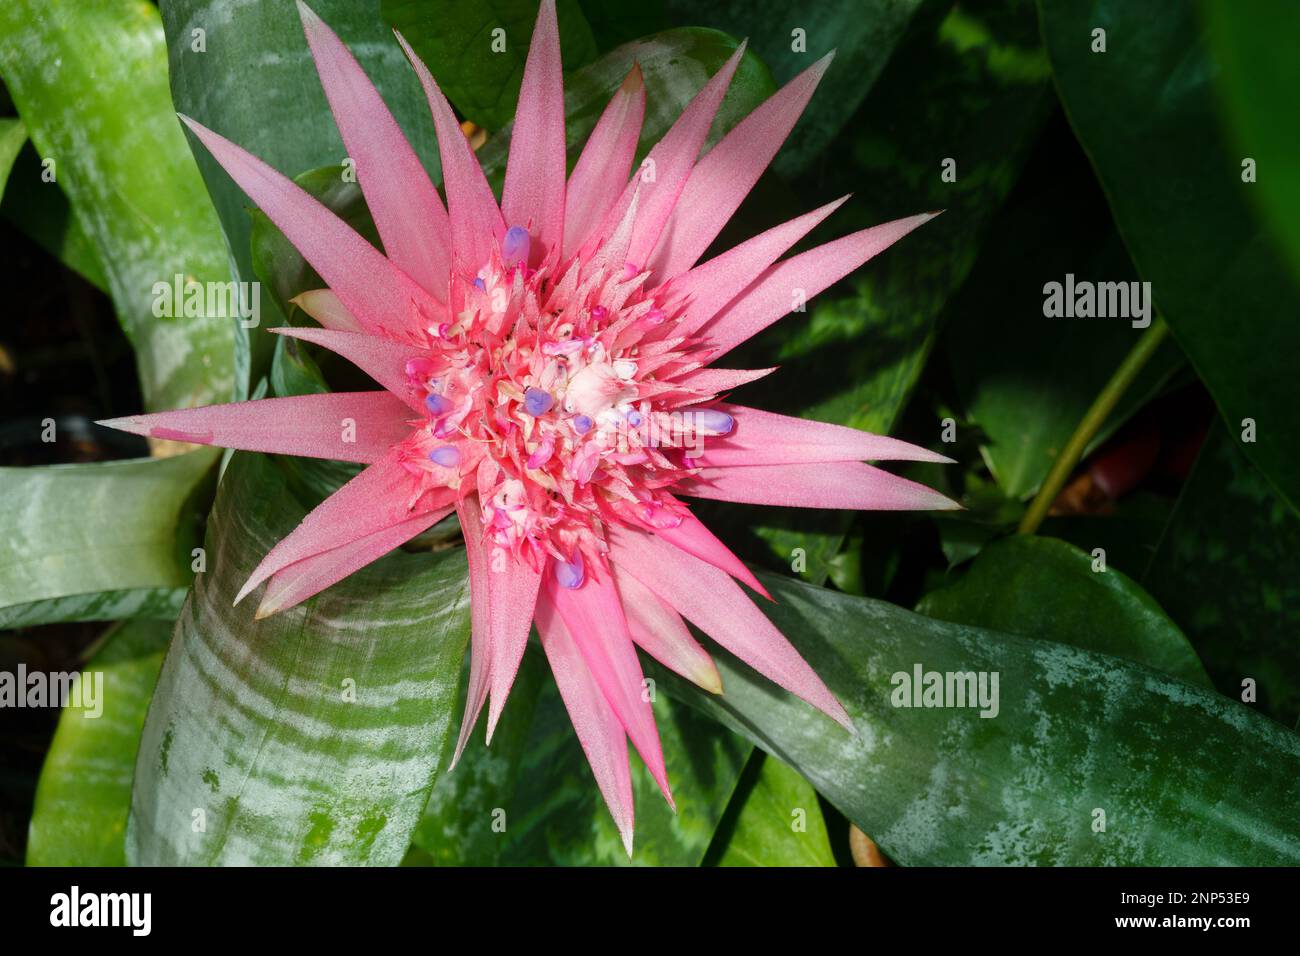 Ants in pink and blue closeup of an exotic tropical, bromeliad flower fully open. Stock Photo